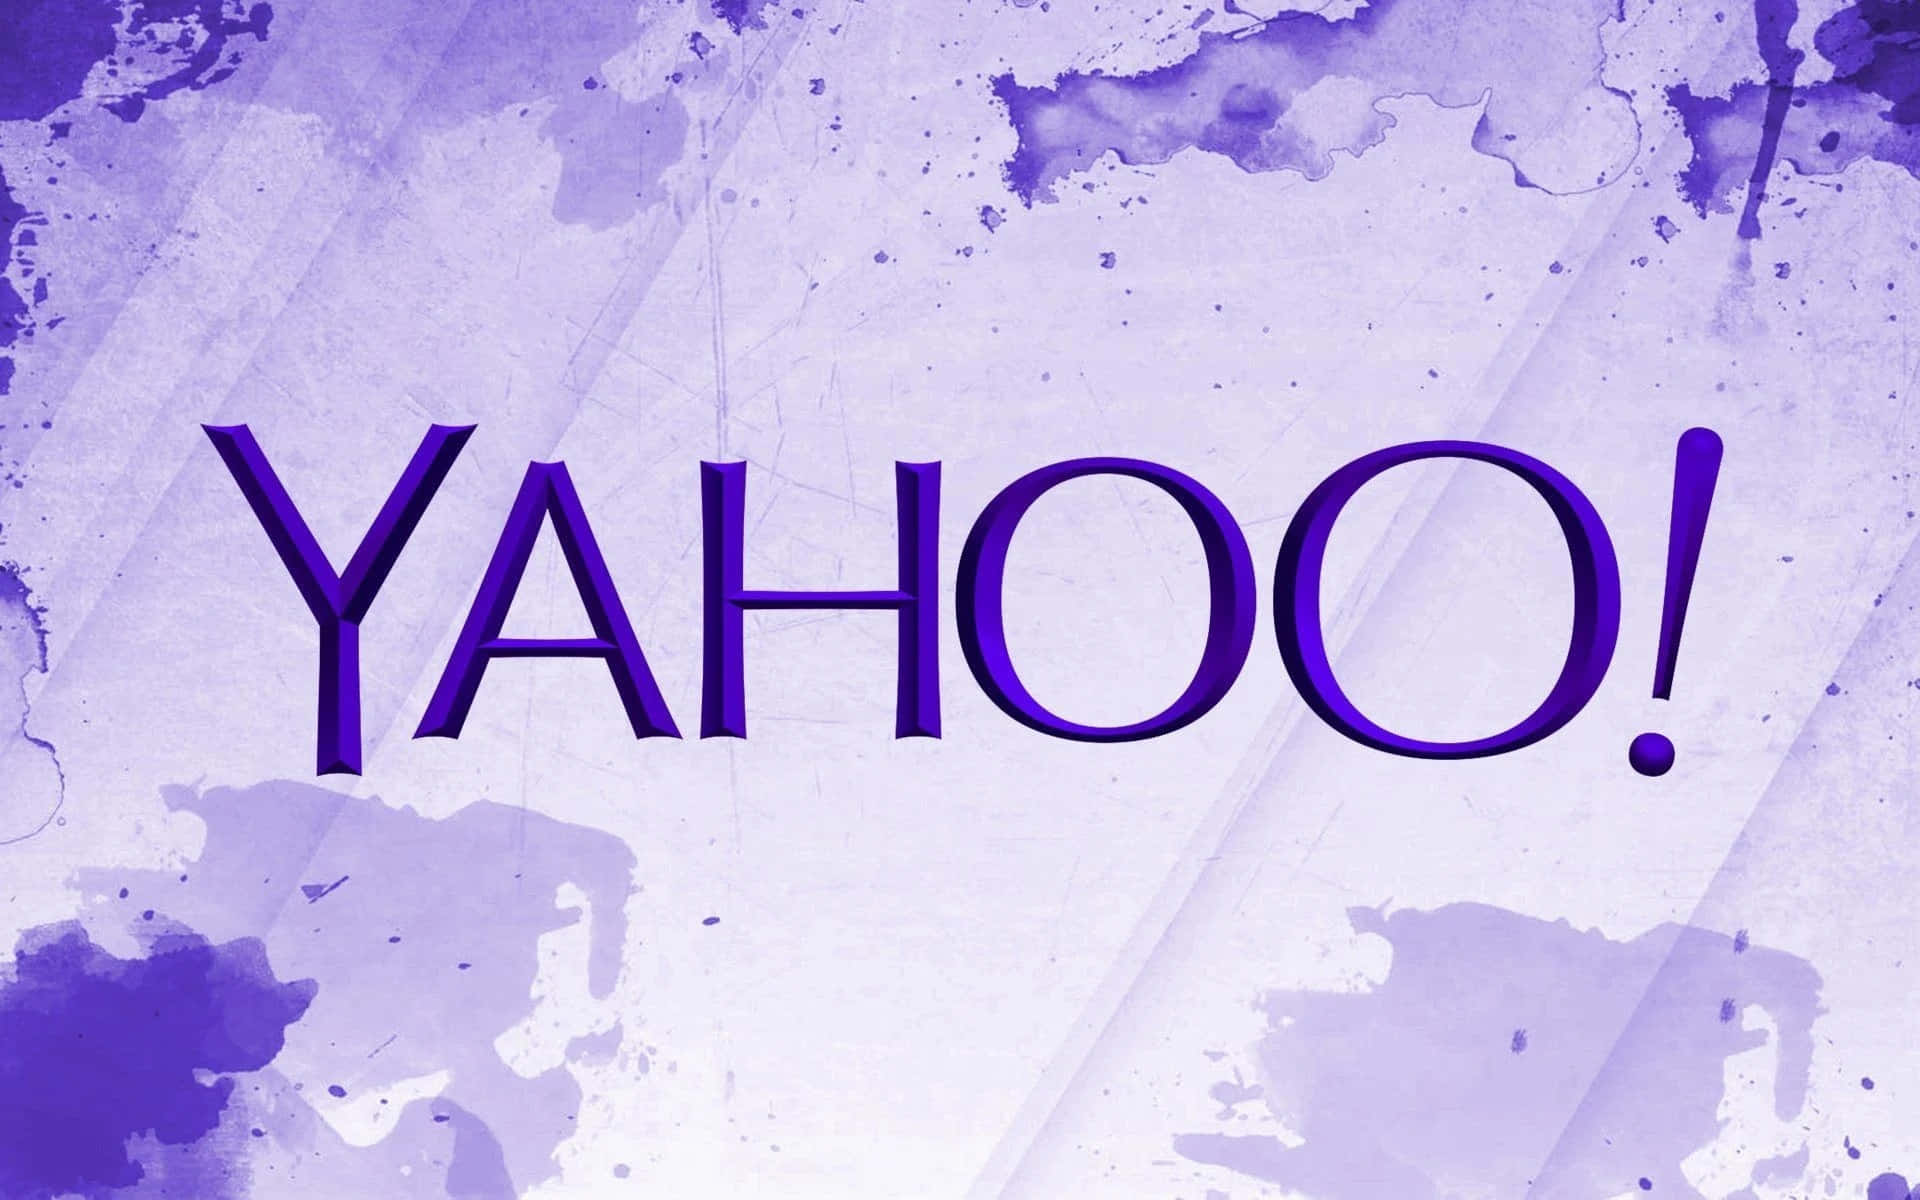 Evoking Yahoo's brand as a Source of Innovation